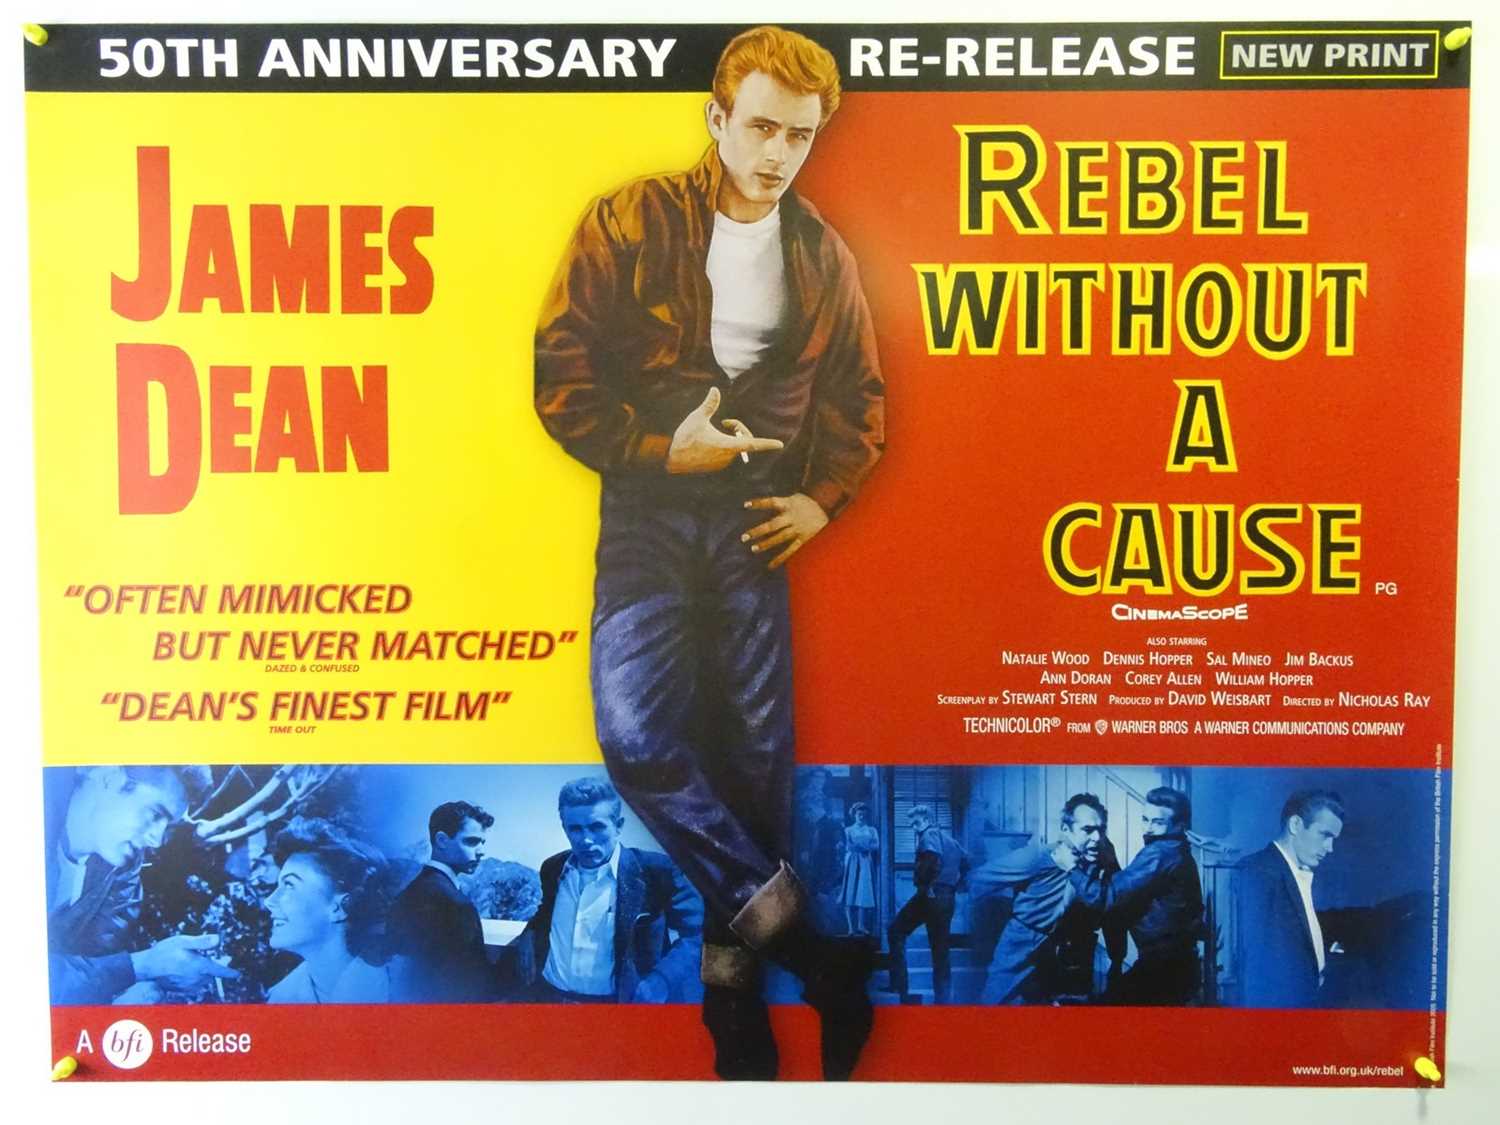 Lot 36 - REBEL WITHOUT A CAUSE (2005 RR) - UK Quad Film...